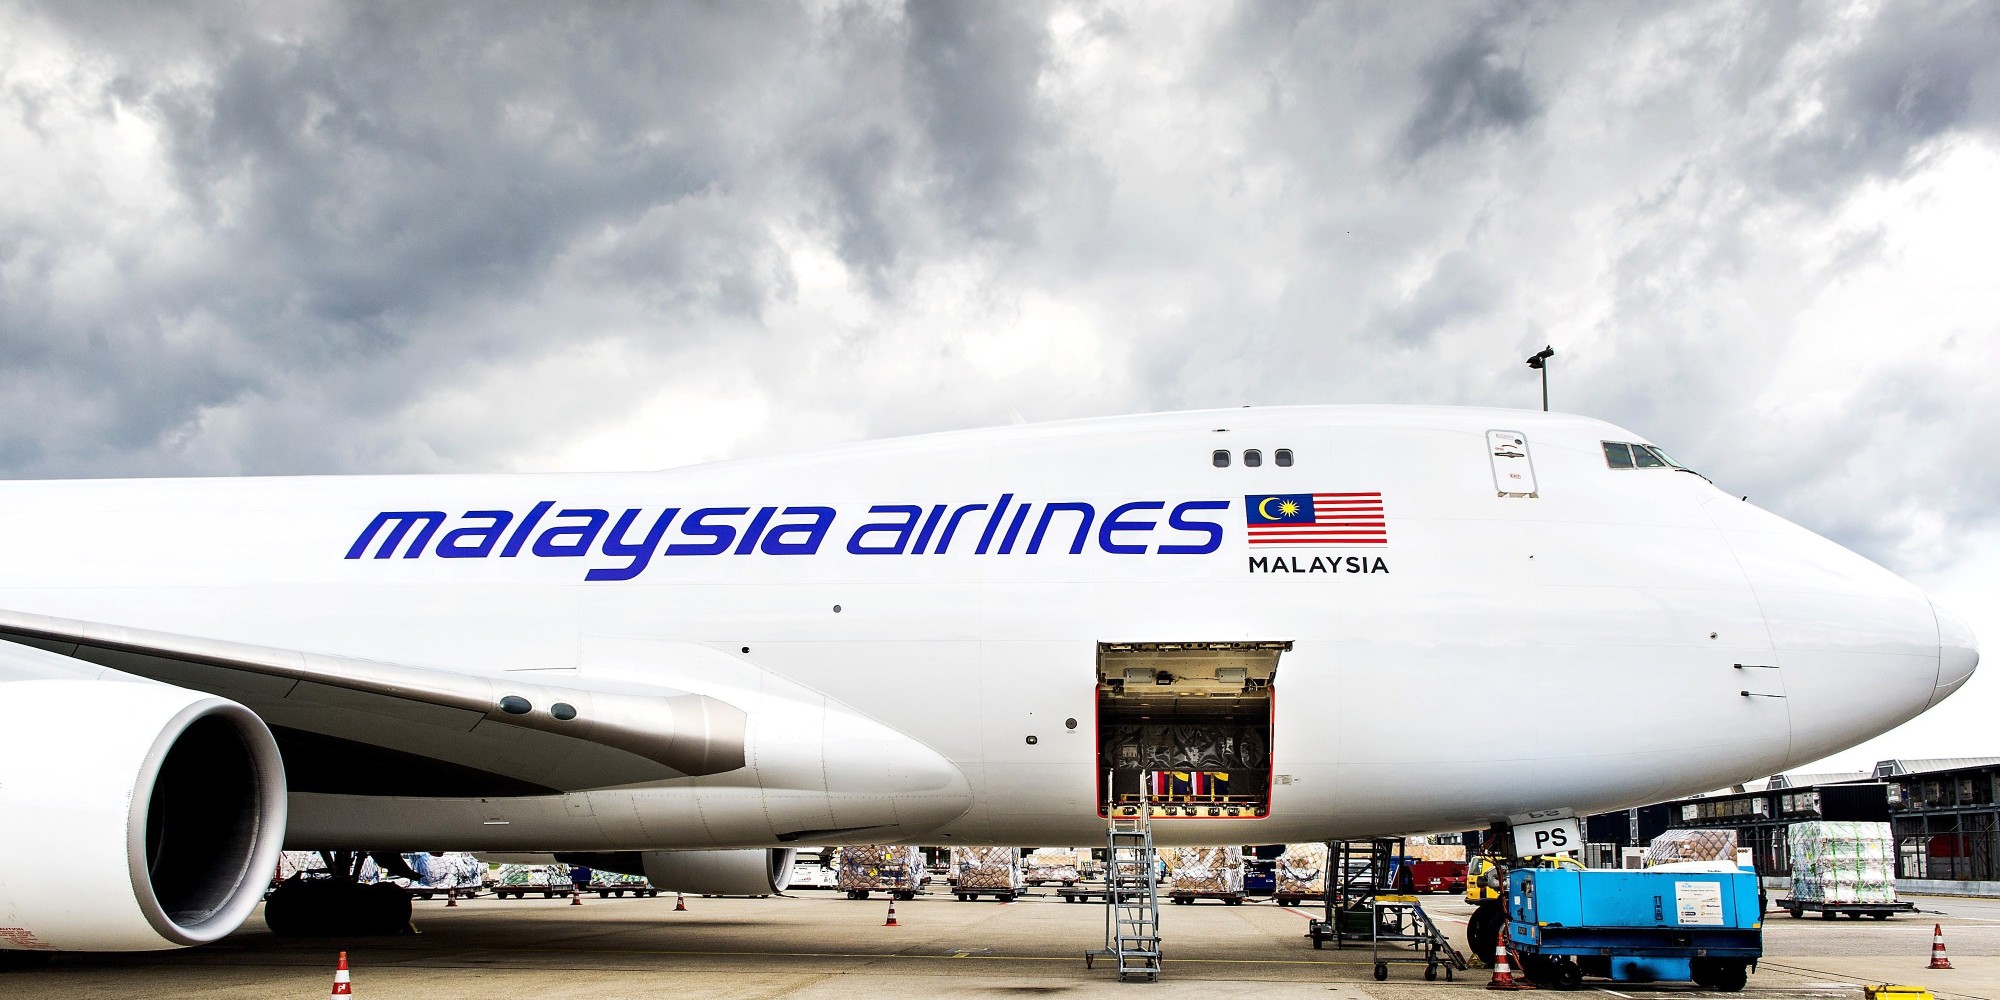 Malaysia Airlines is 1st carrier to sign up for new satellite-tracking service